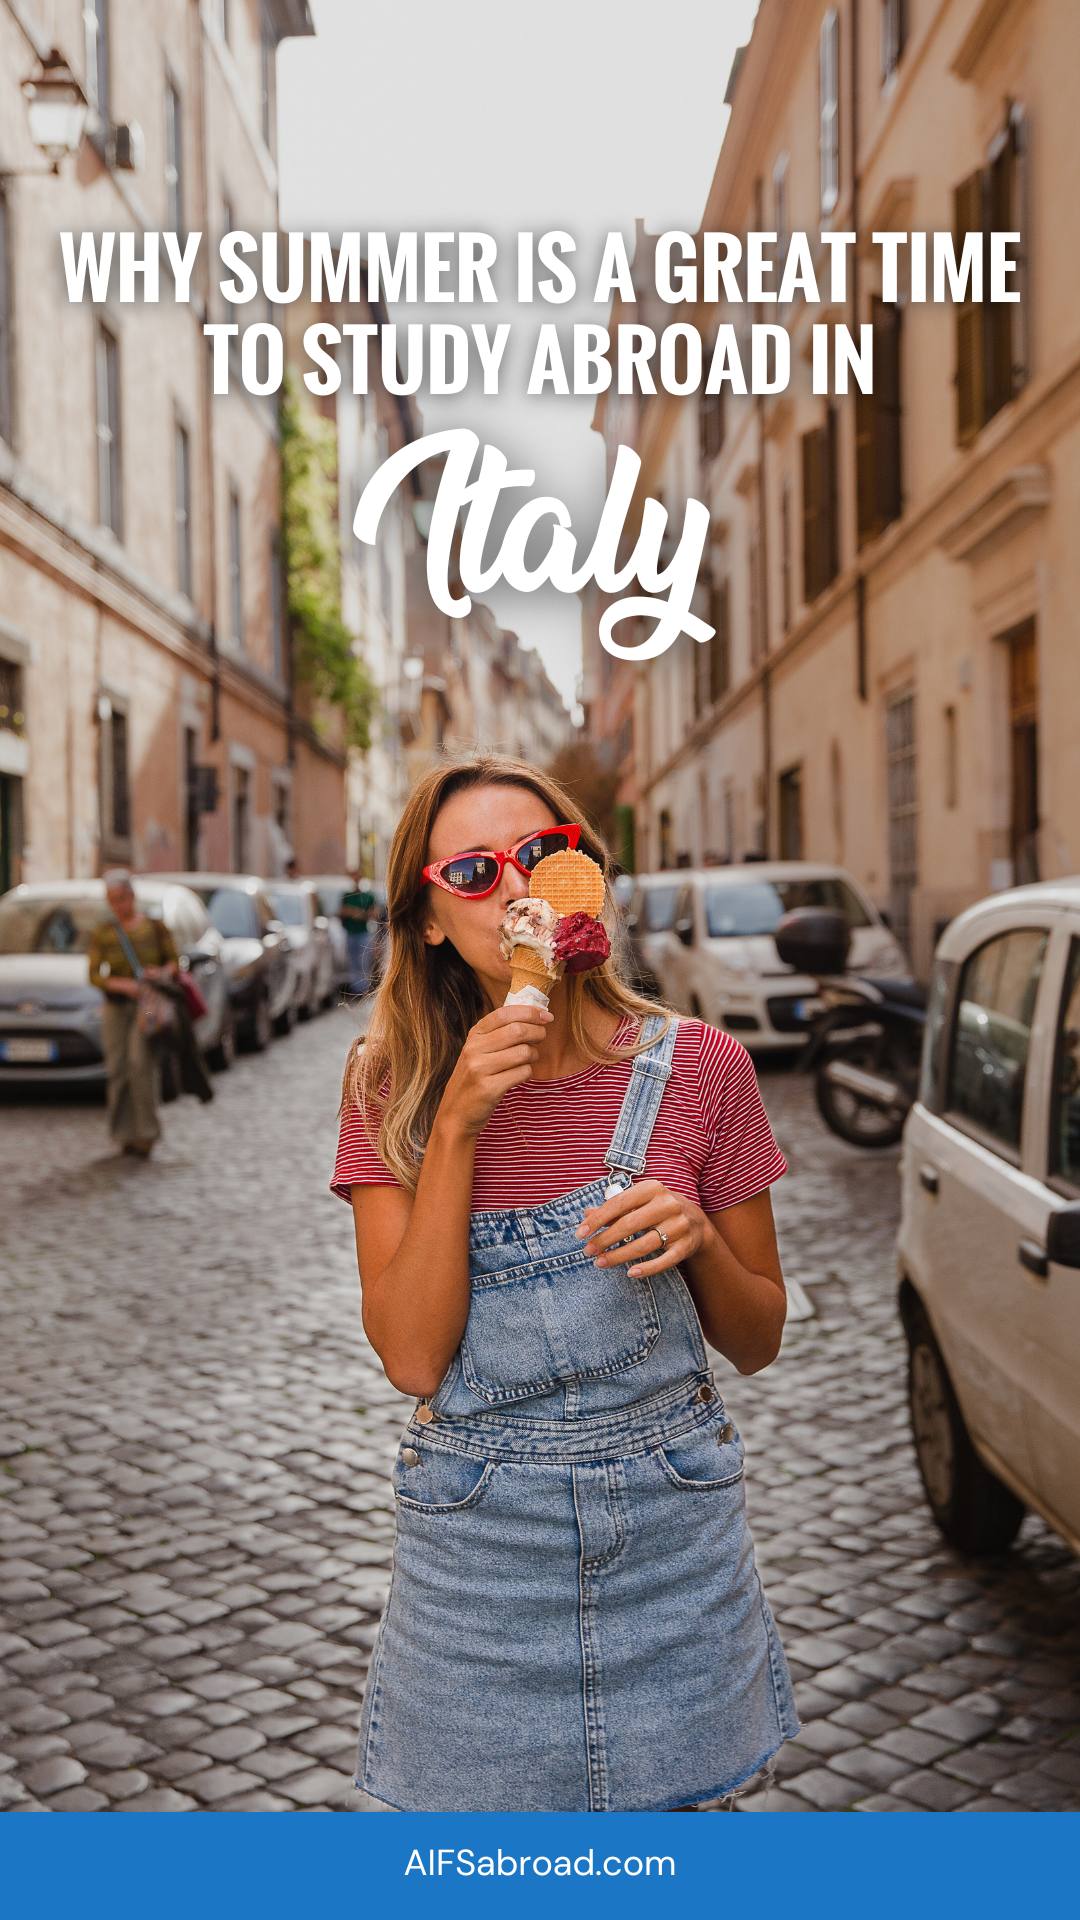 Young woman in Italy holding a gelato with text overlay saying "Why summer is a great time to study abroad in Italy"